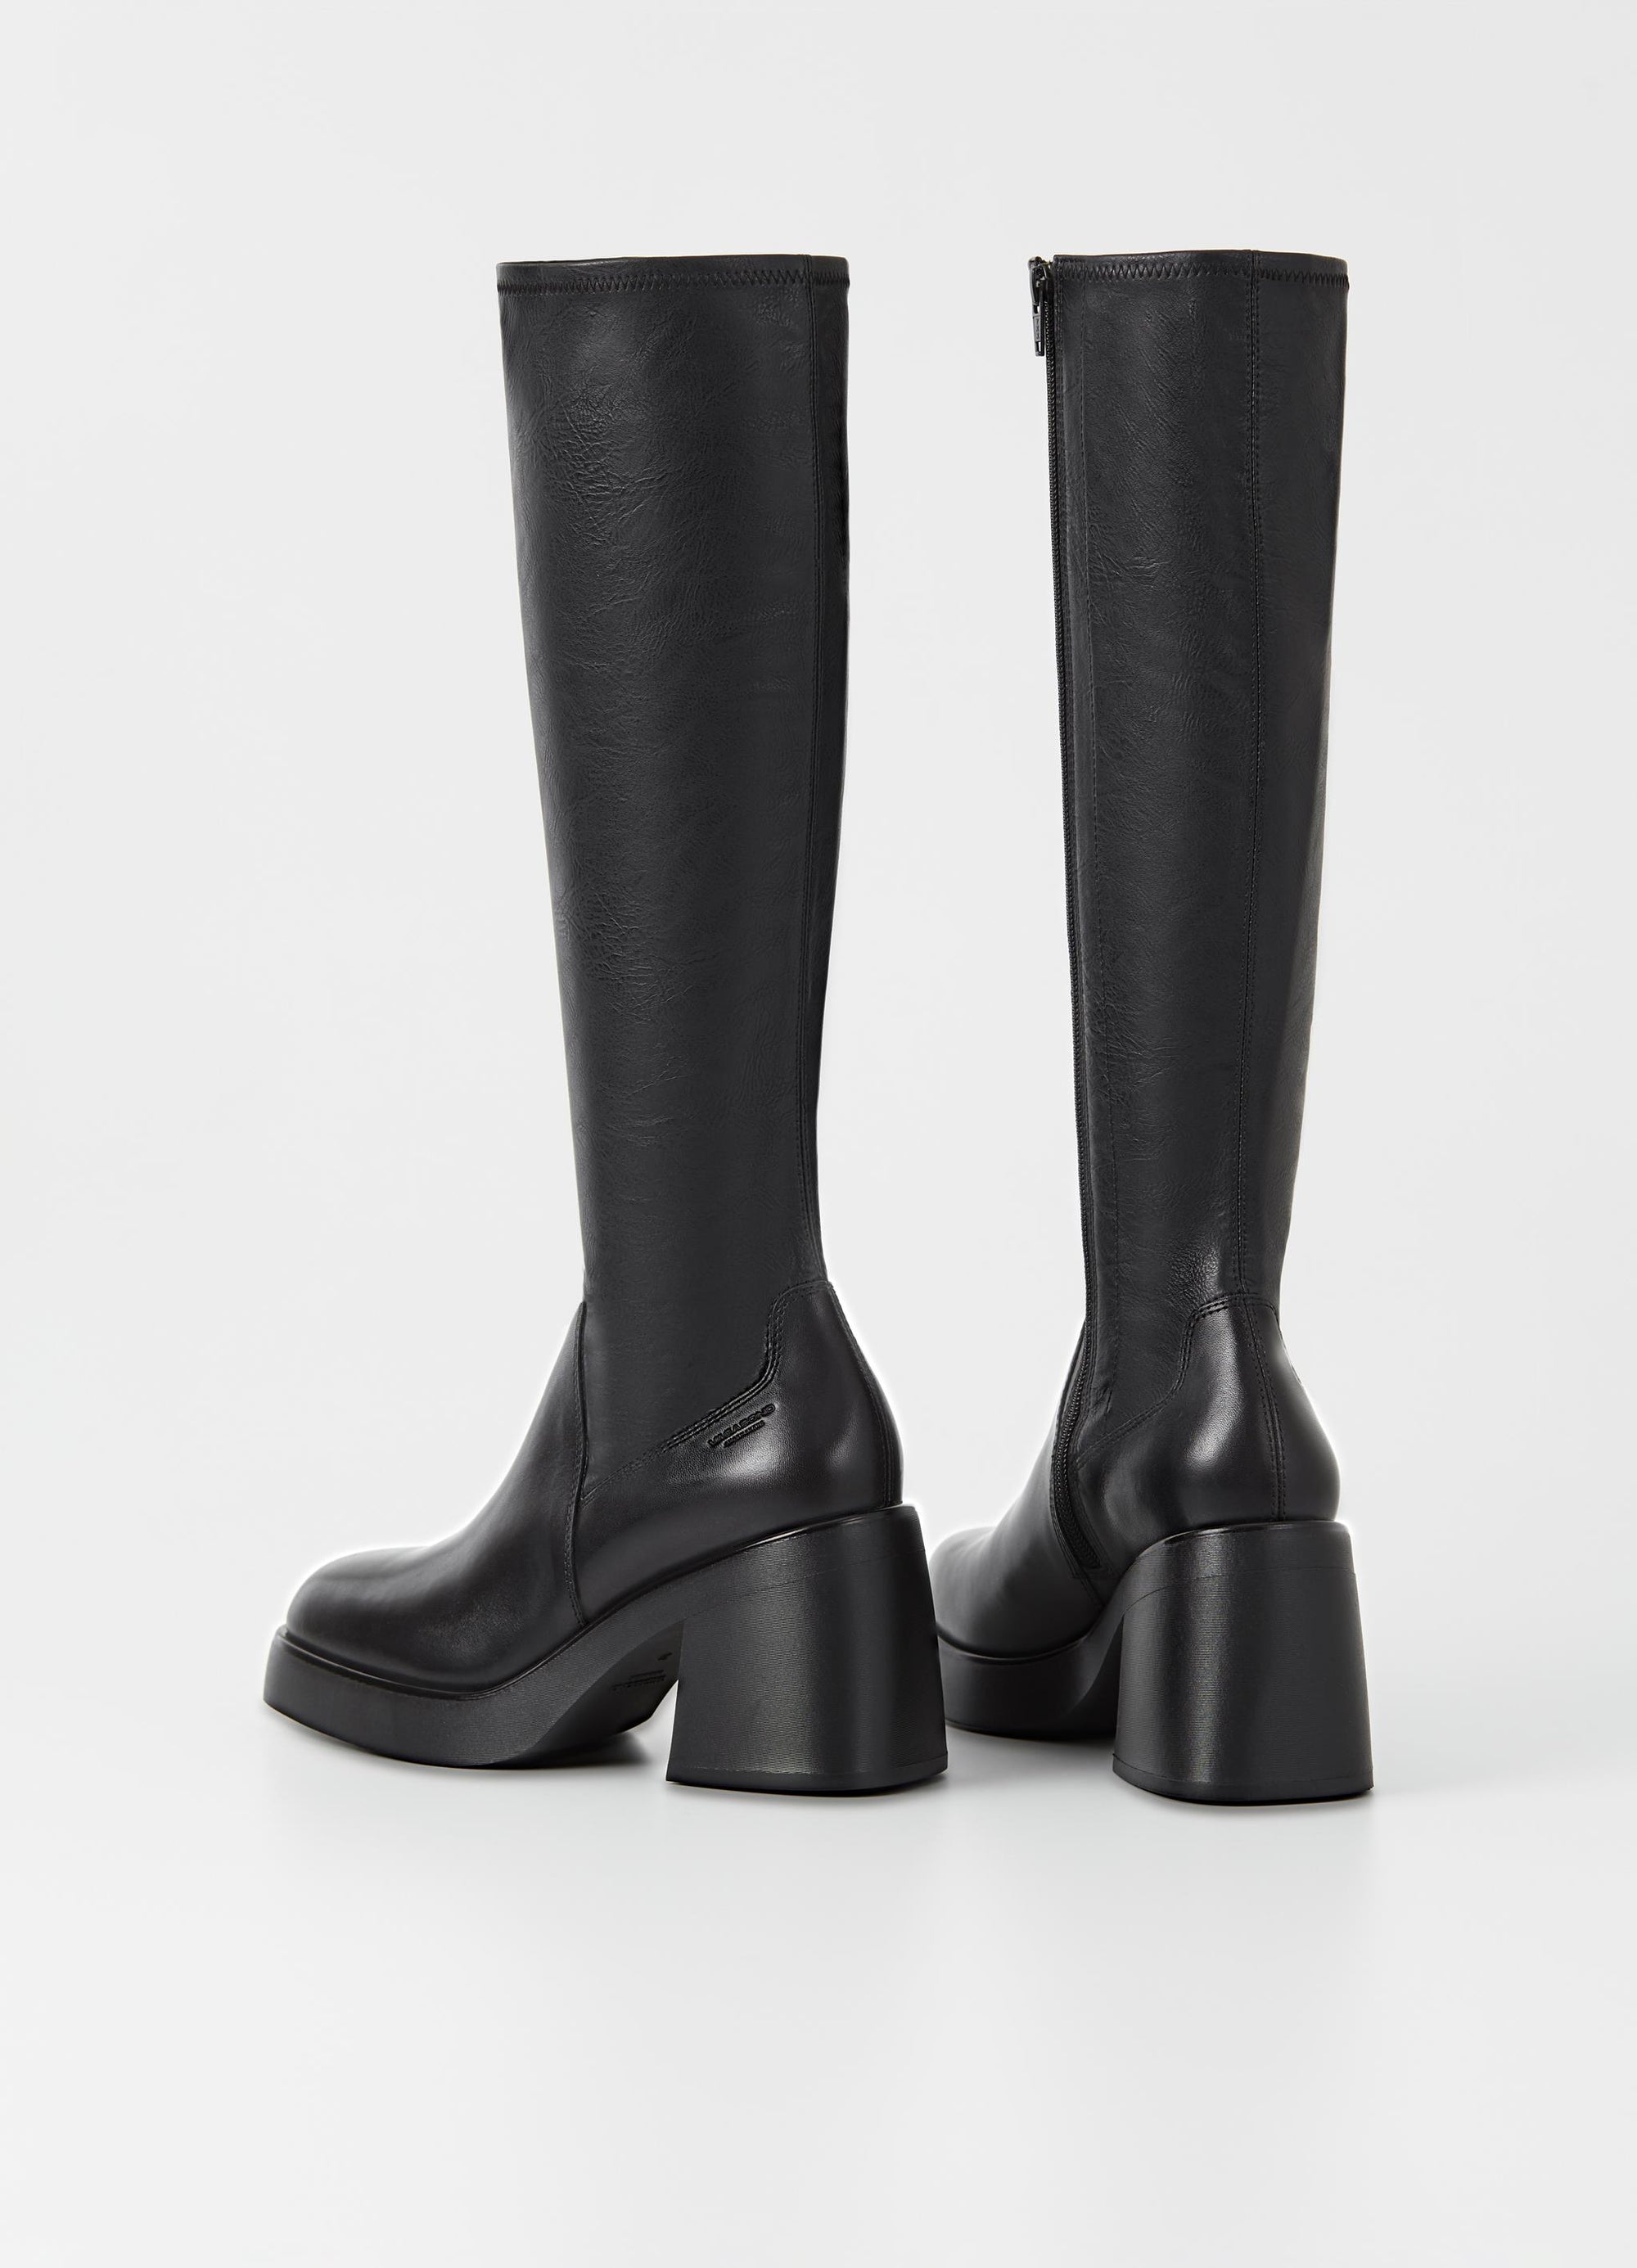 Vagabond Brooke knee high tall black leather boots platform | Pipe and ...